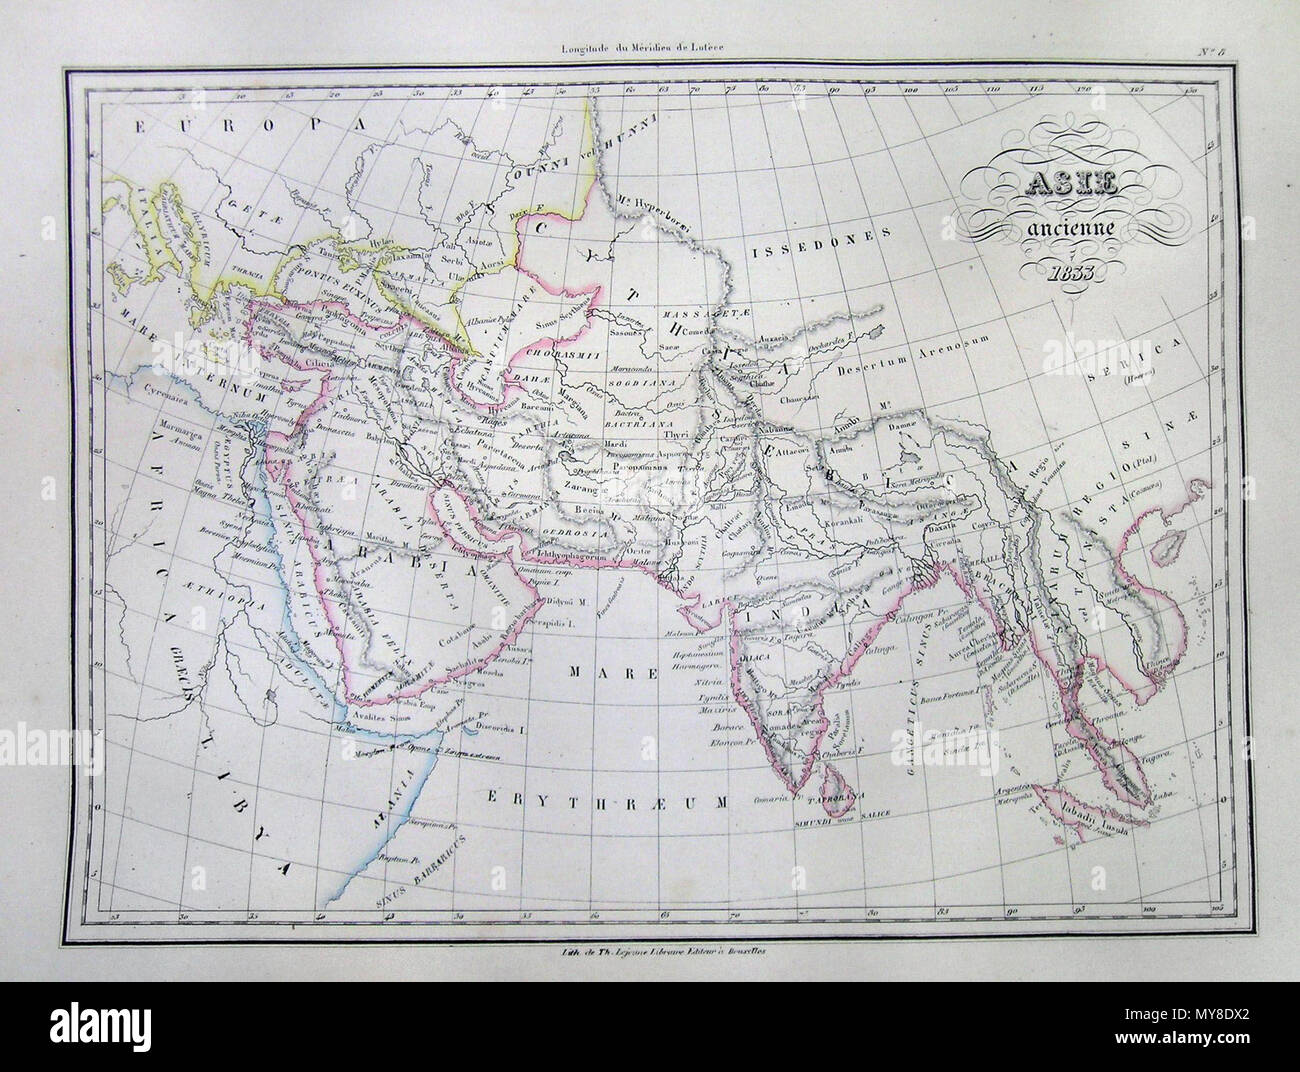 . Asia Ancienne 1833.  English: This beautiful 1833 hand colored map depicts Asia in Ancient times. Extends only as far as modern day Vietnam and does not include China. All text is in French. . 1833 5 1833 Malte-Brun Map of Asia in Ancient Times - Geographicus - AsiaAncient-mb-1837 Stock Photo